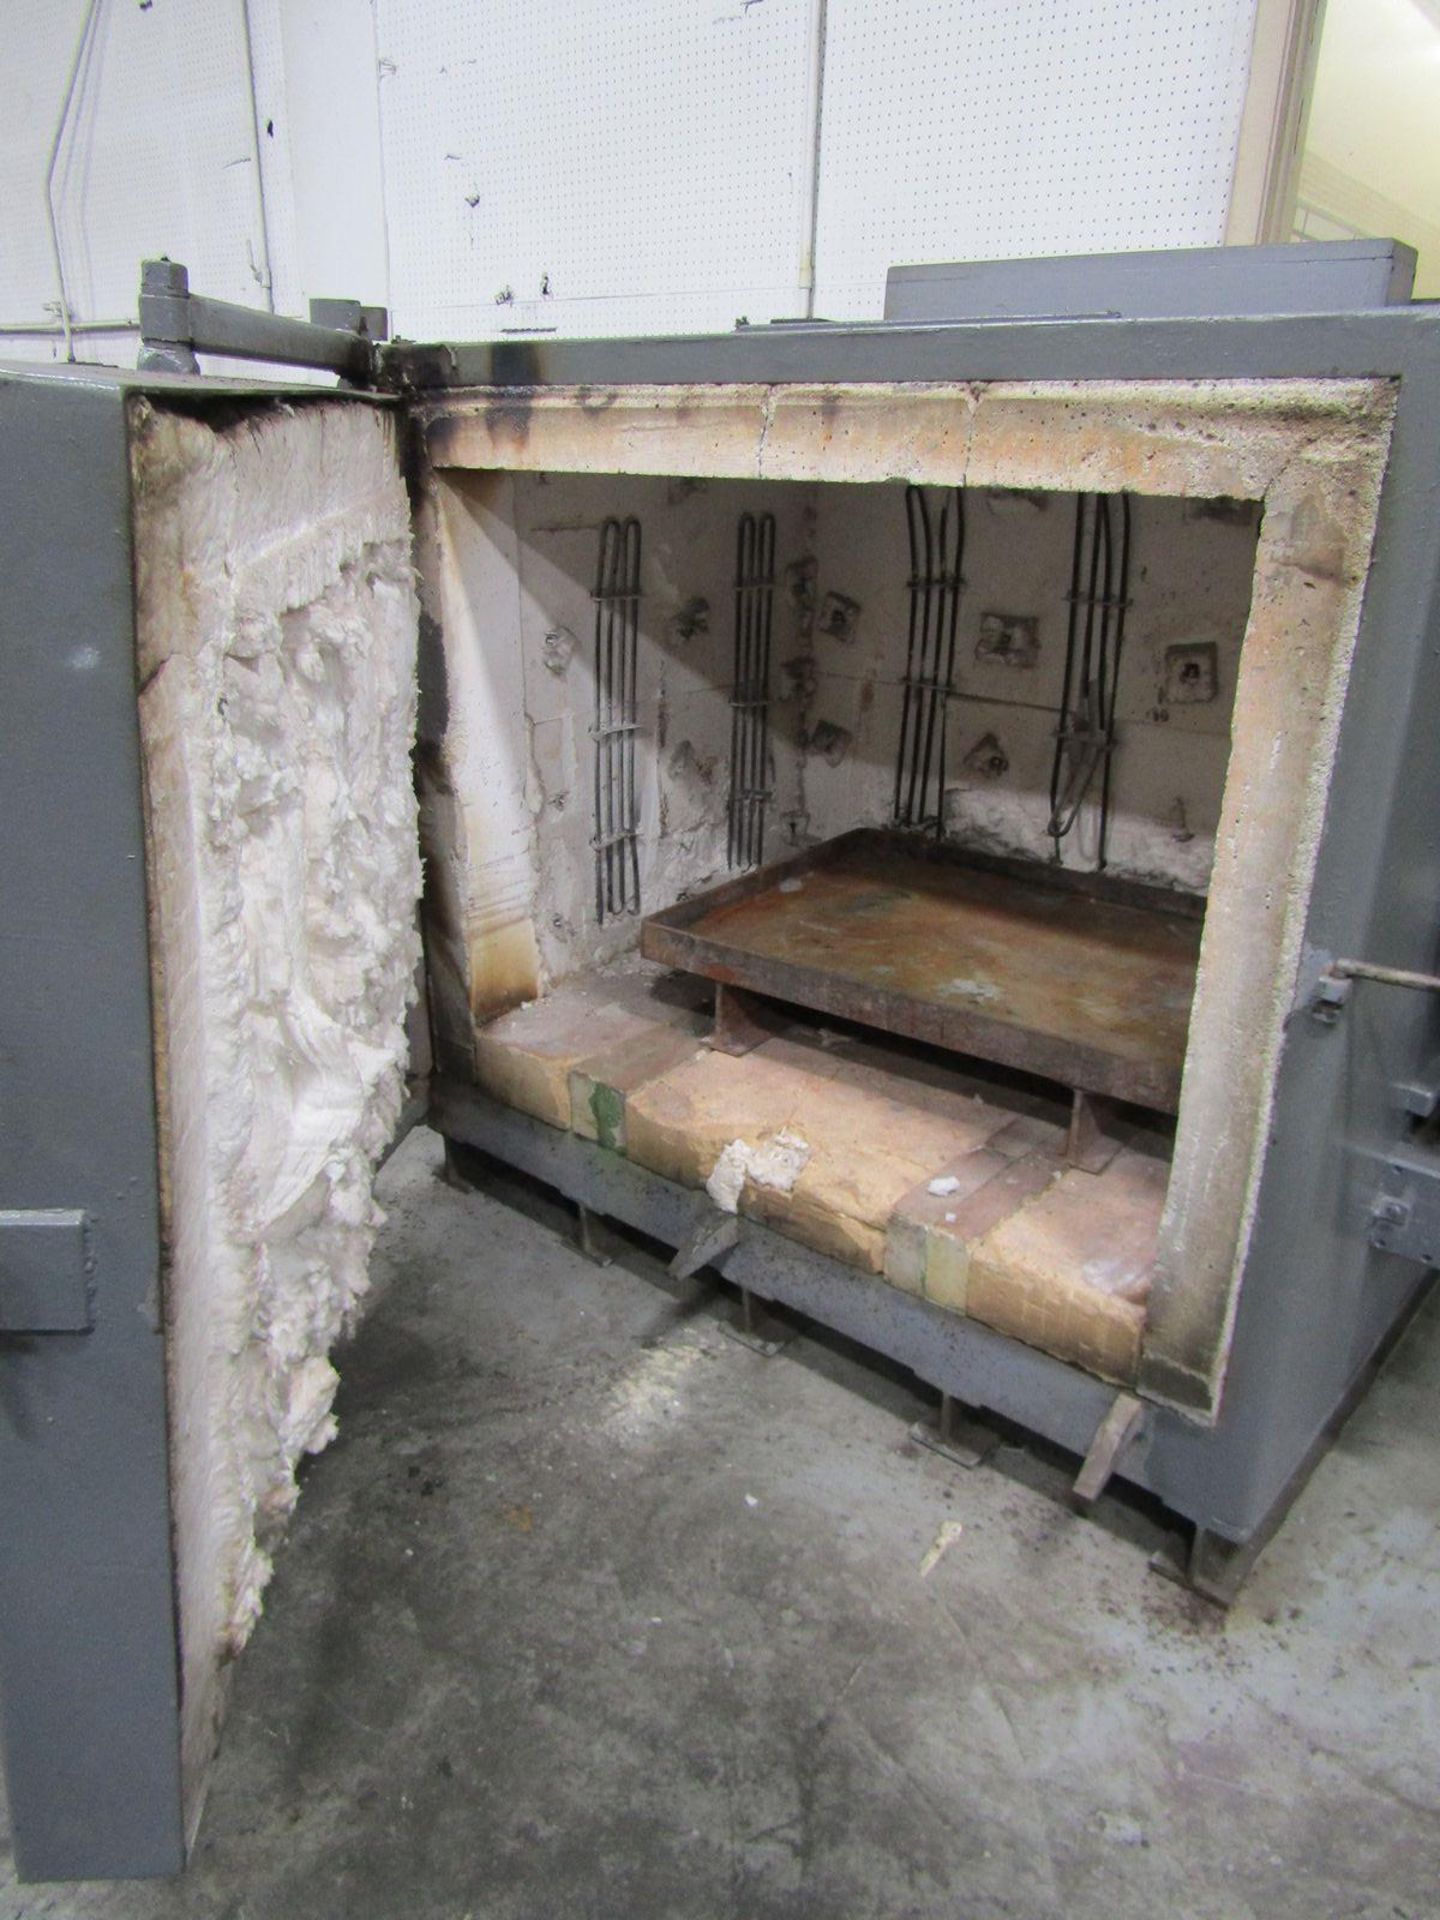 52 in. x 40 in. x 40 in. (approx.) Furnace; with Controls - Image 2 of 3